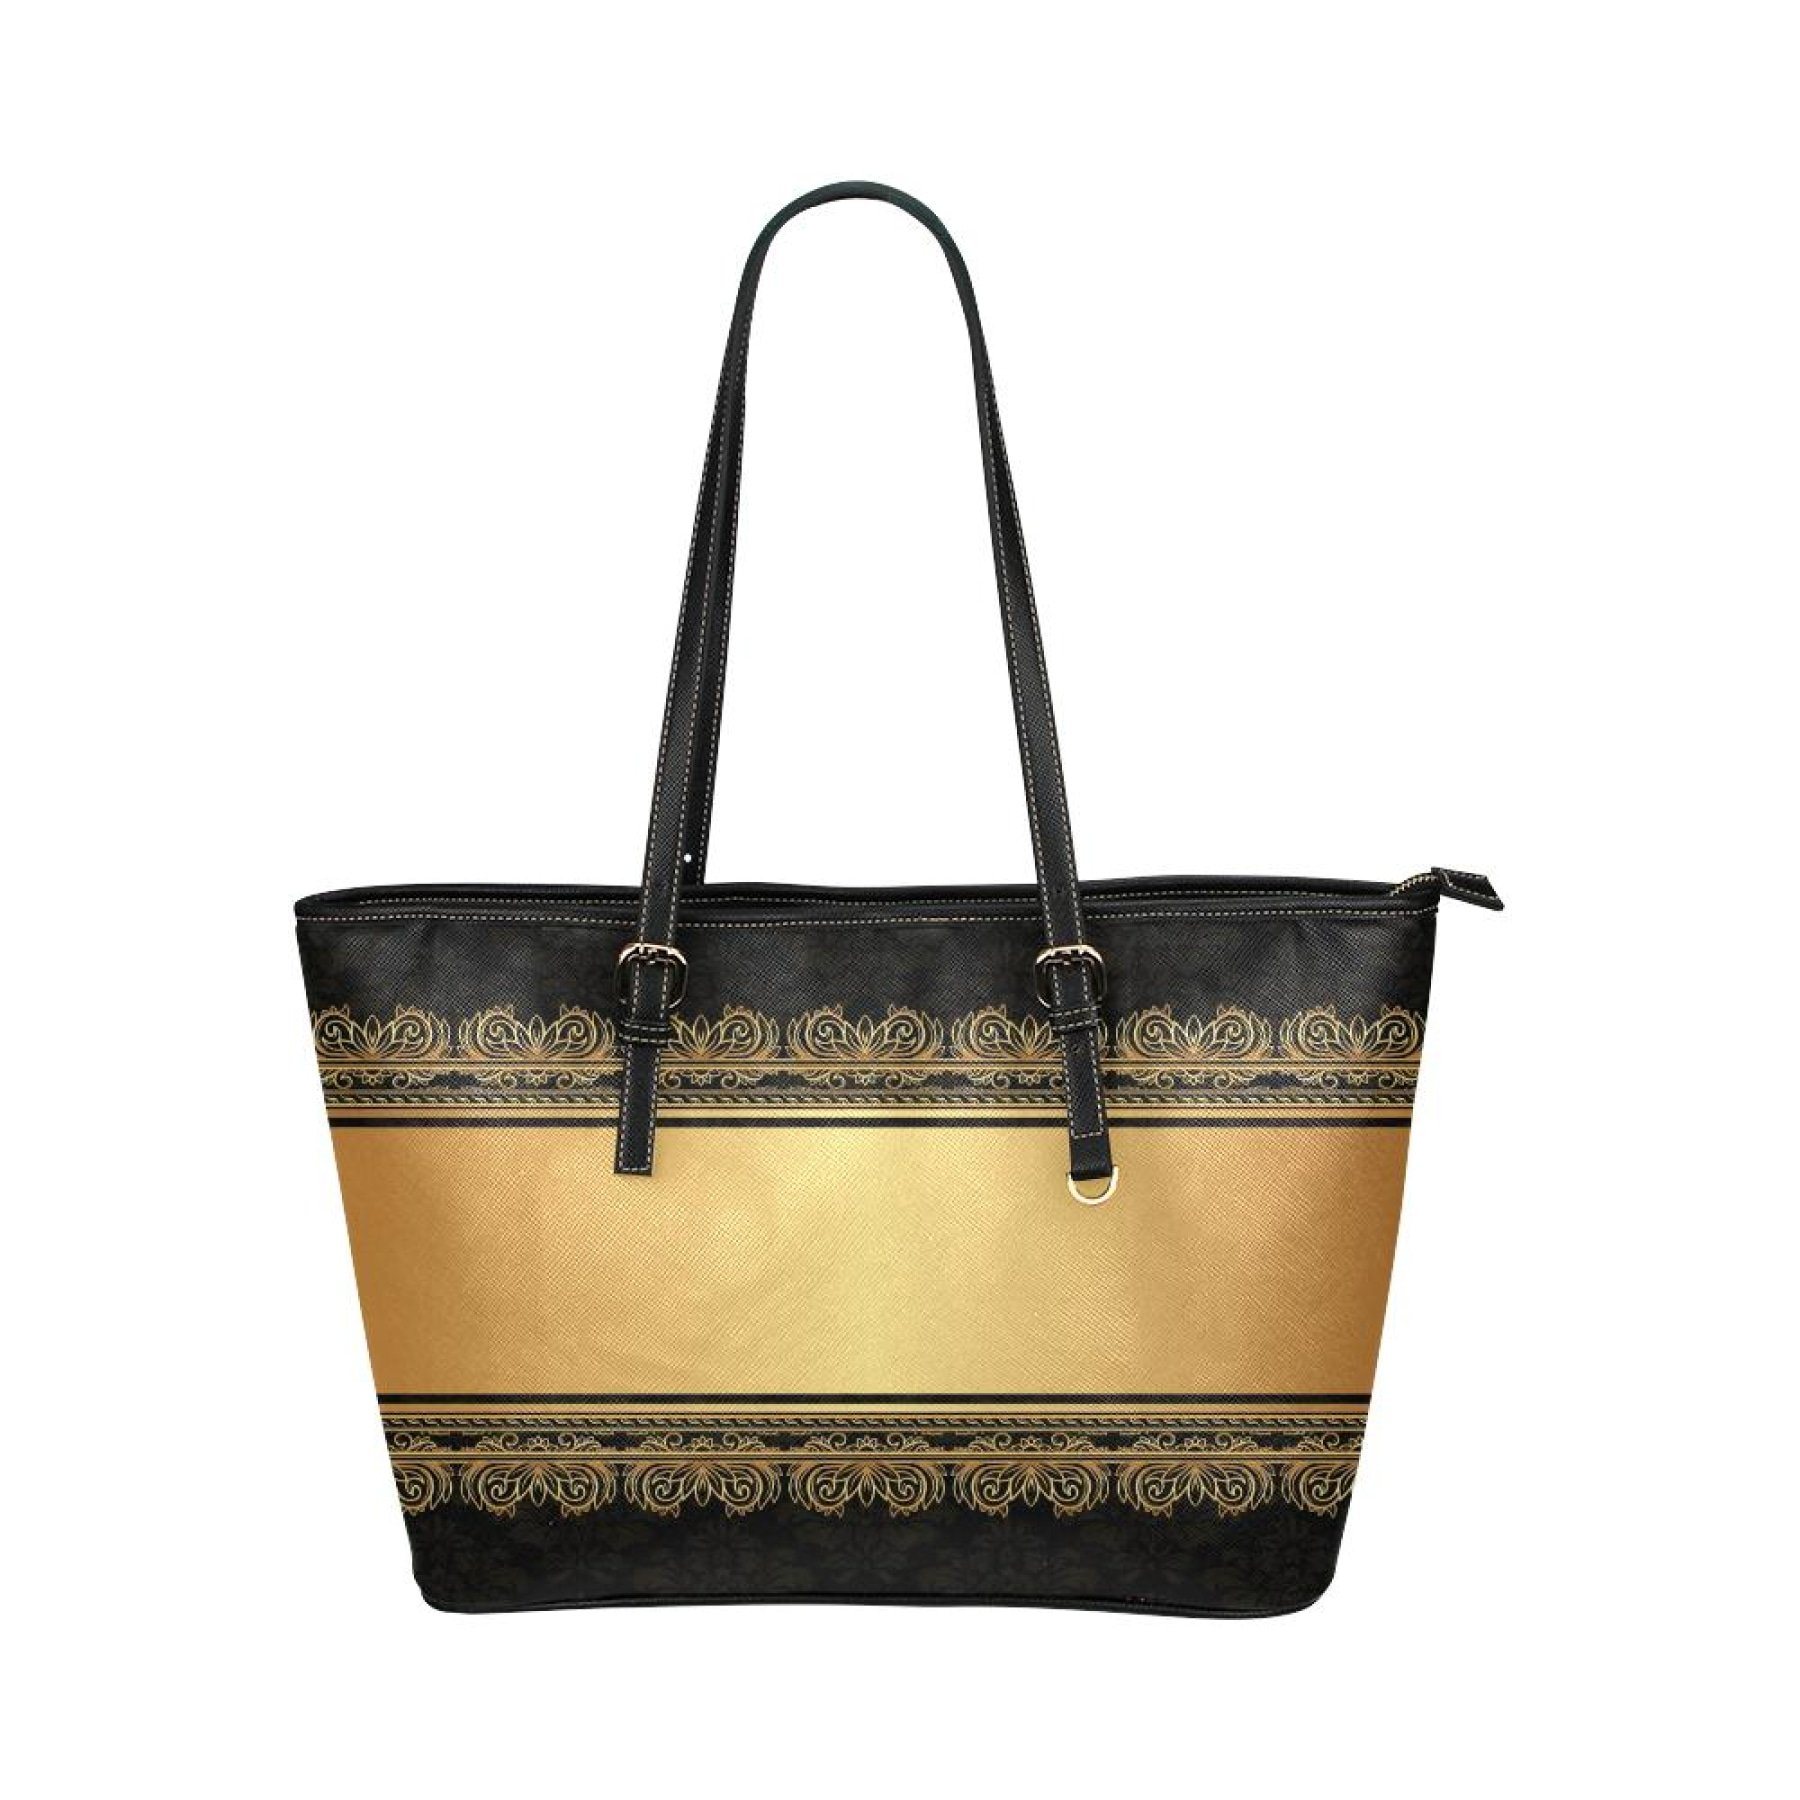 Black And Gold Vintage Style Leather Tote Bag 10